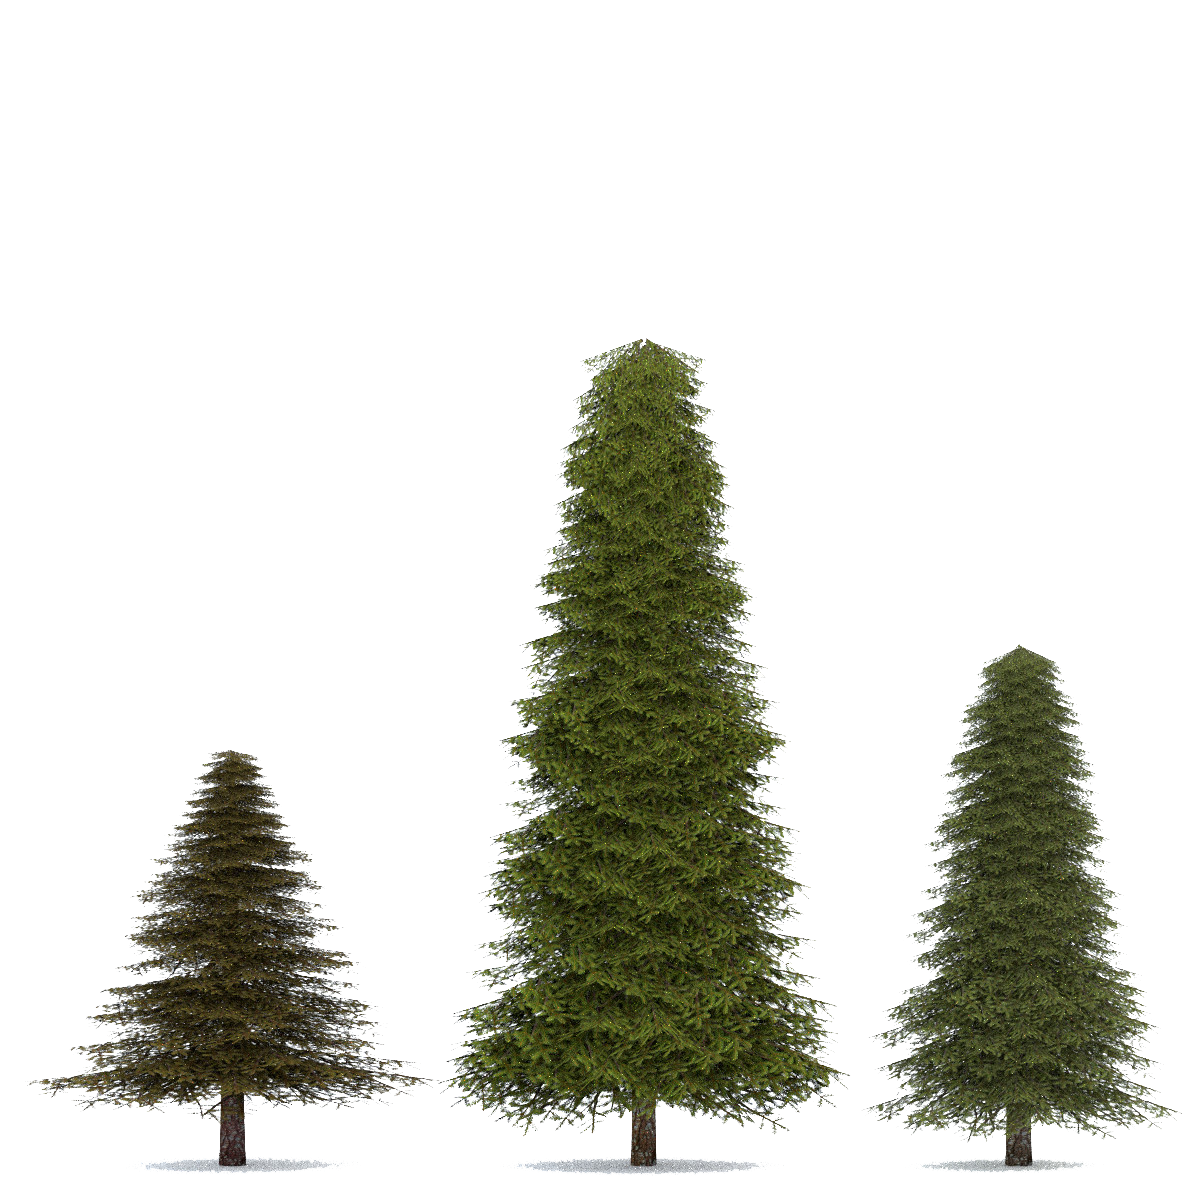 Fir-Tree Png Hd PNG Image